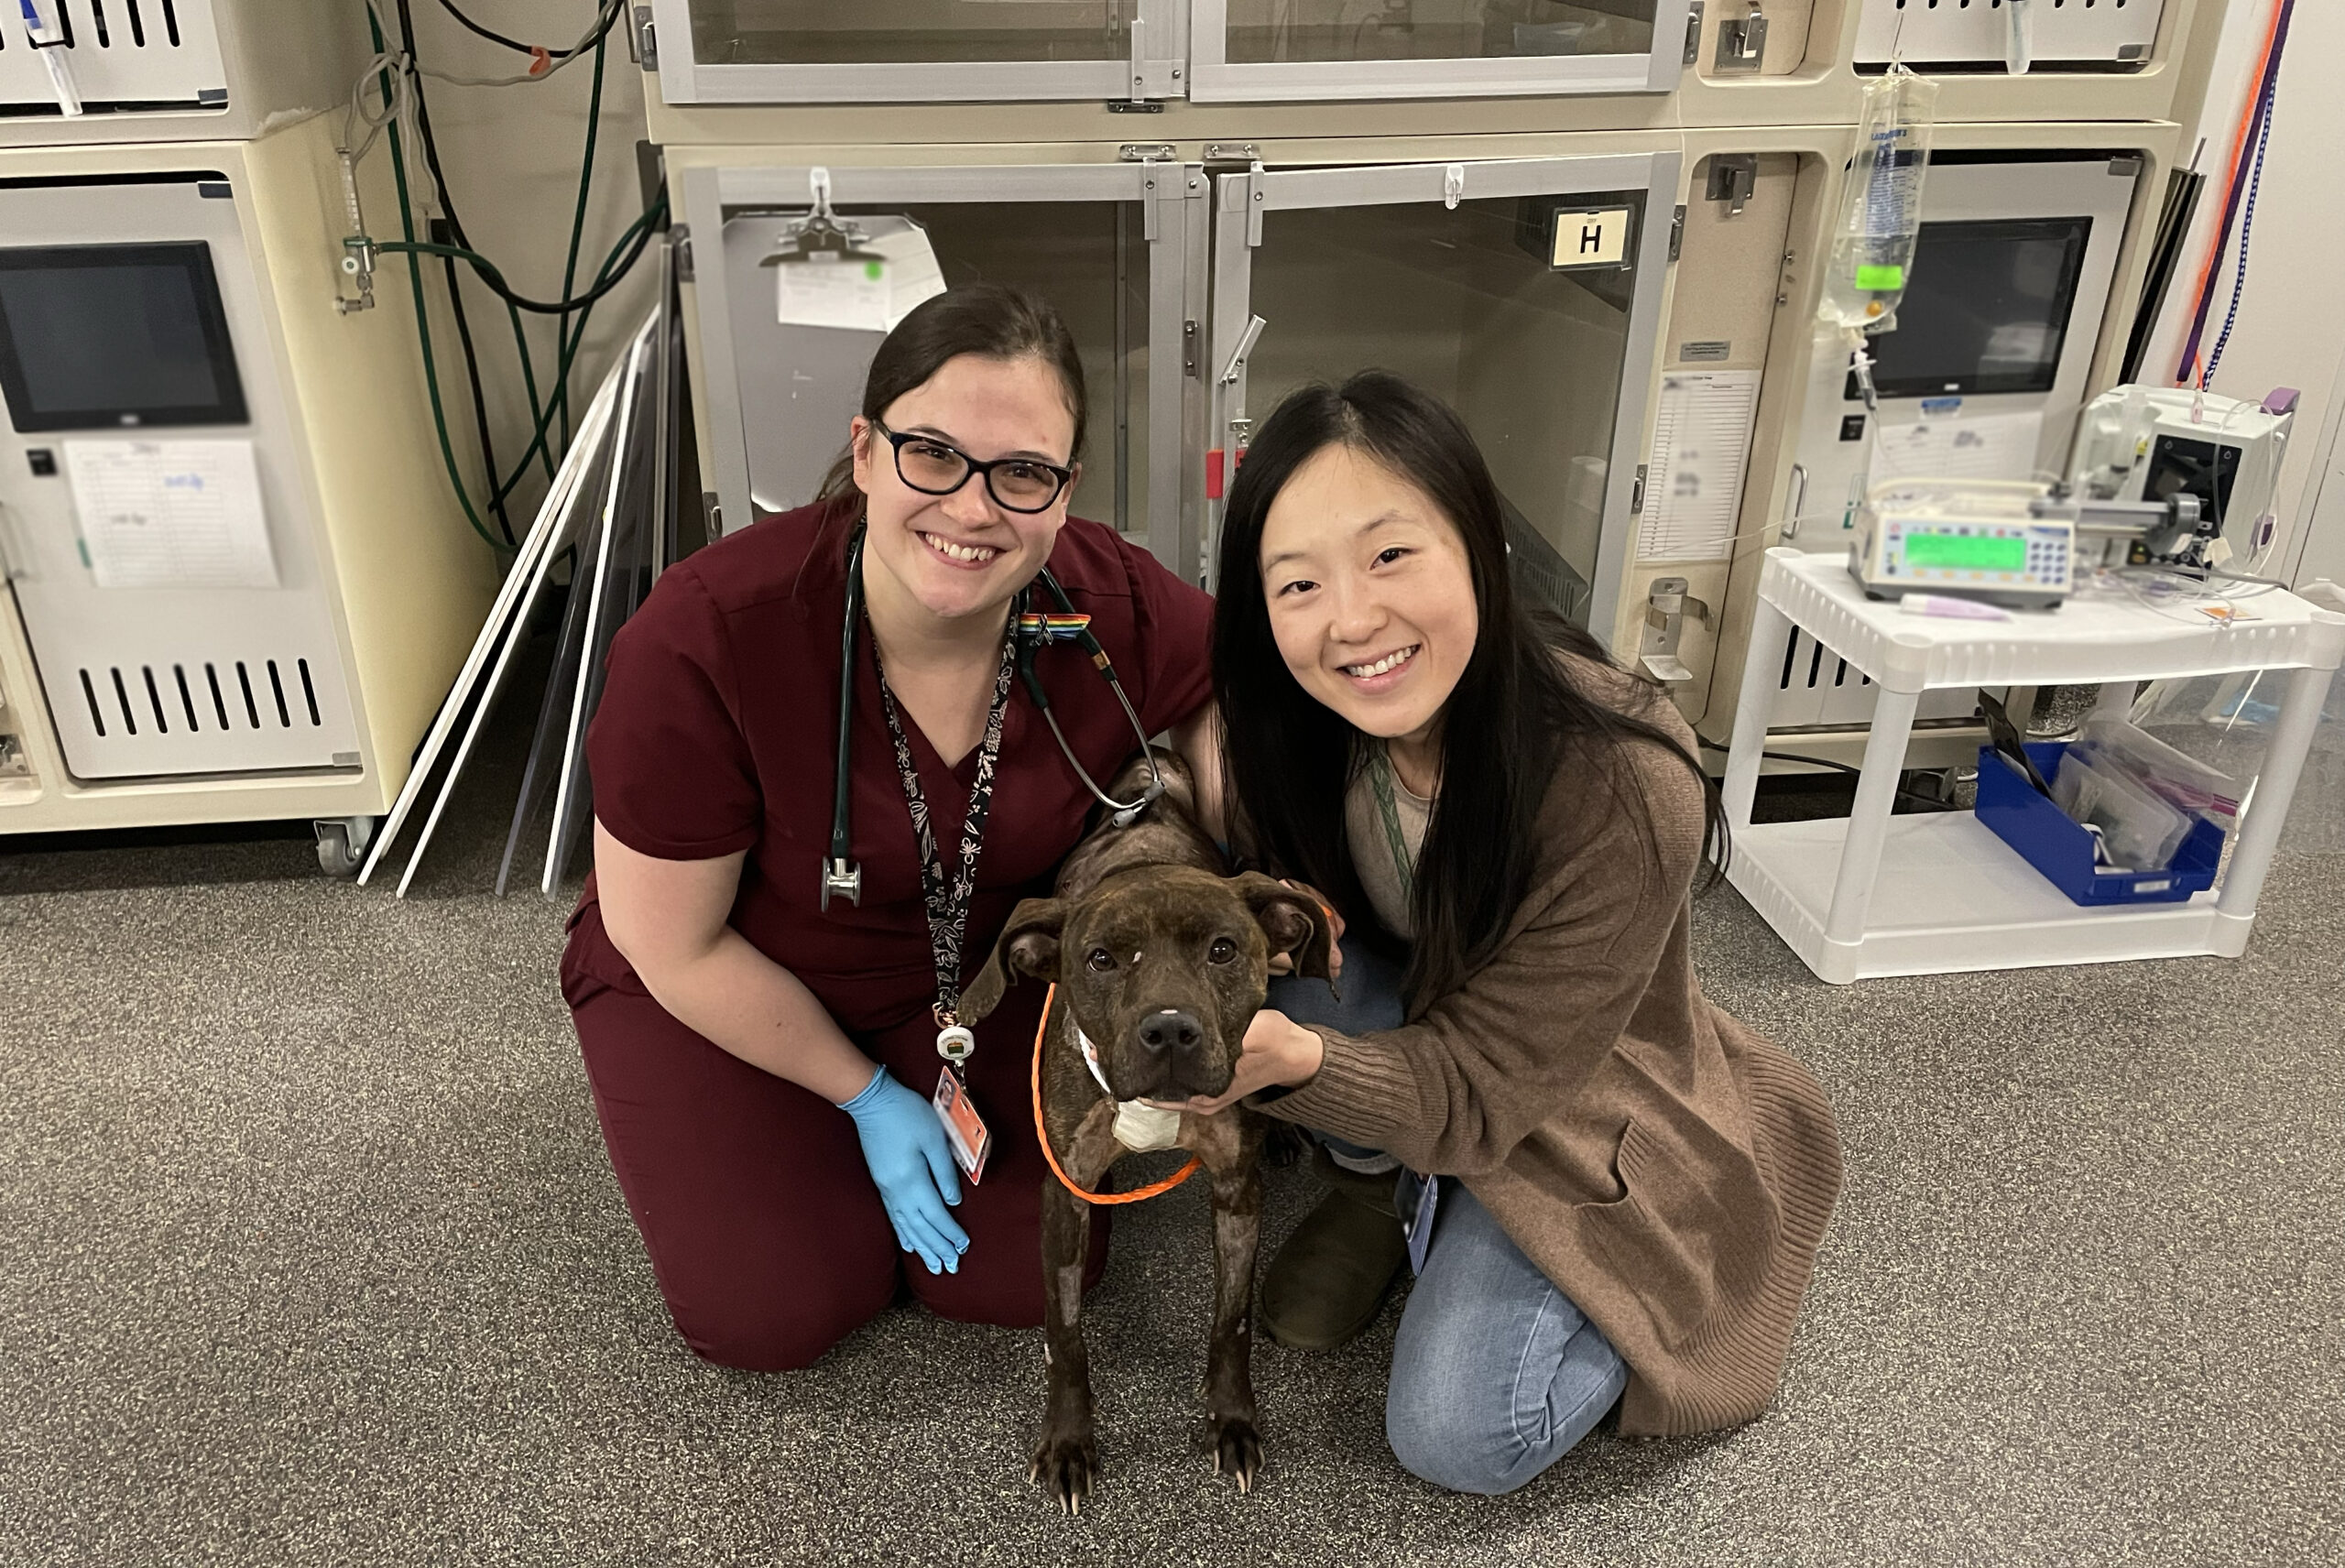 Dr. Martindale and Dr. Chen pose with Birdie, a brown and black midsize dog, in the hospital